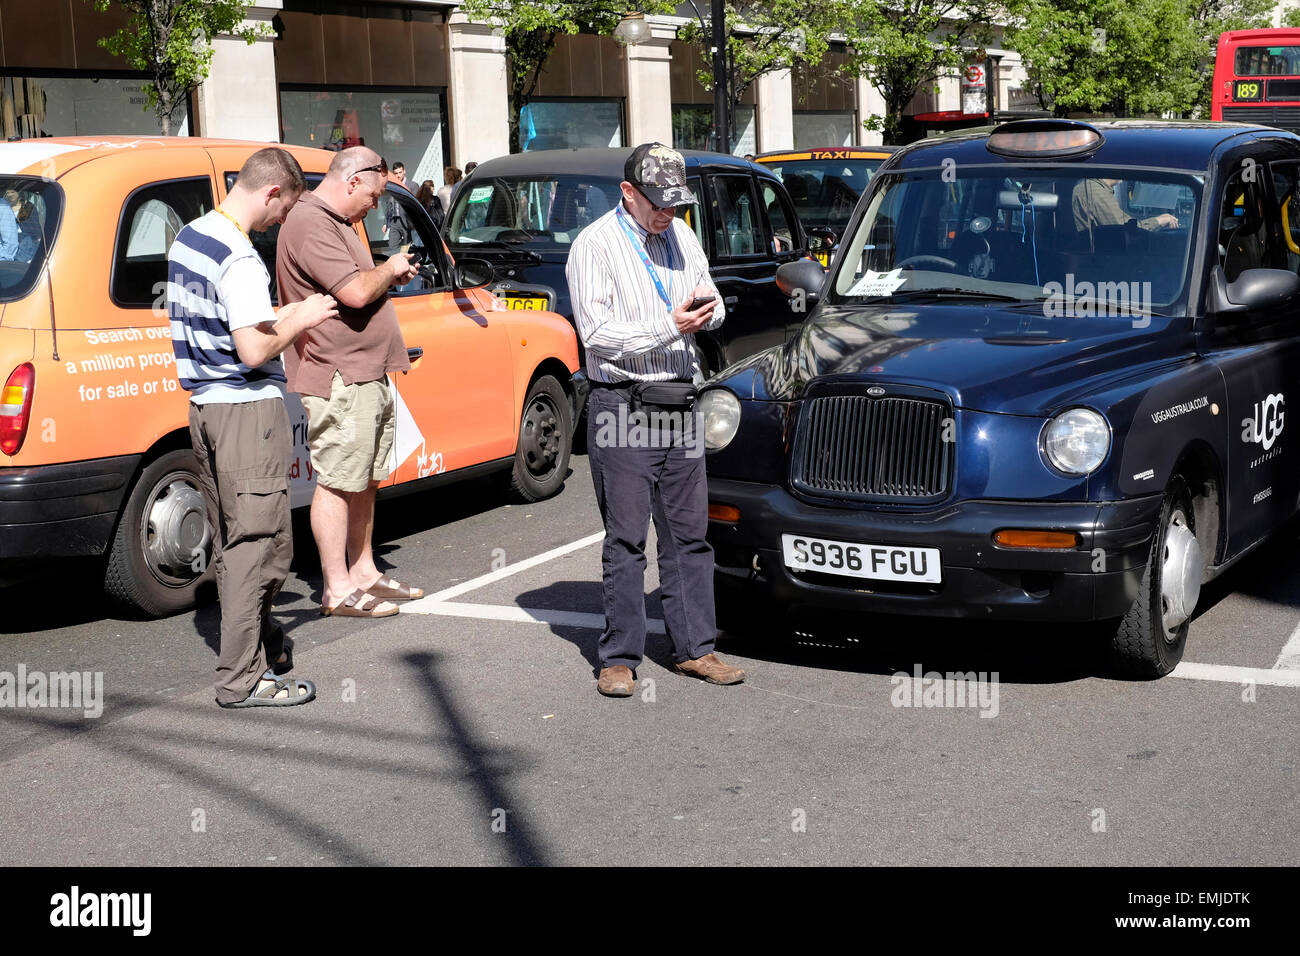 A black cab driver texts in the middle of the street during a protest against illegal touting. Stock Photo